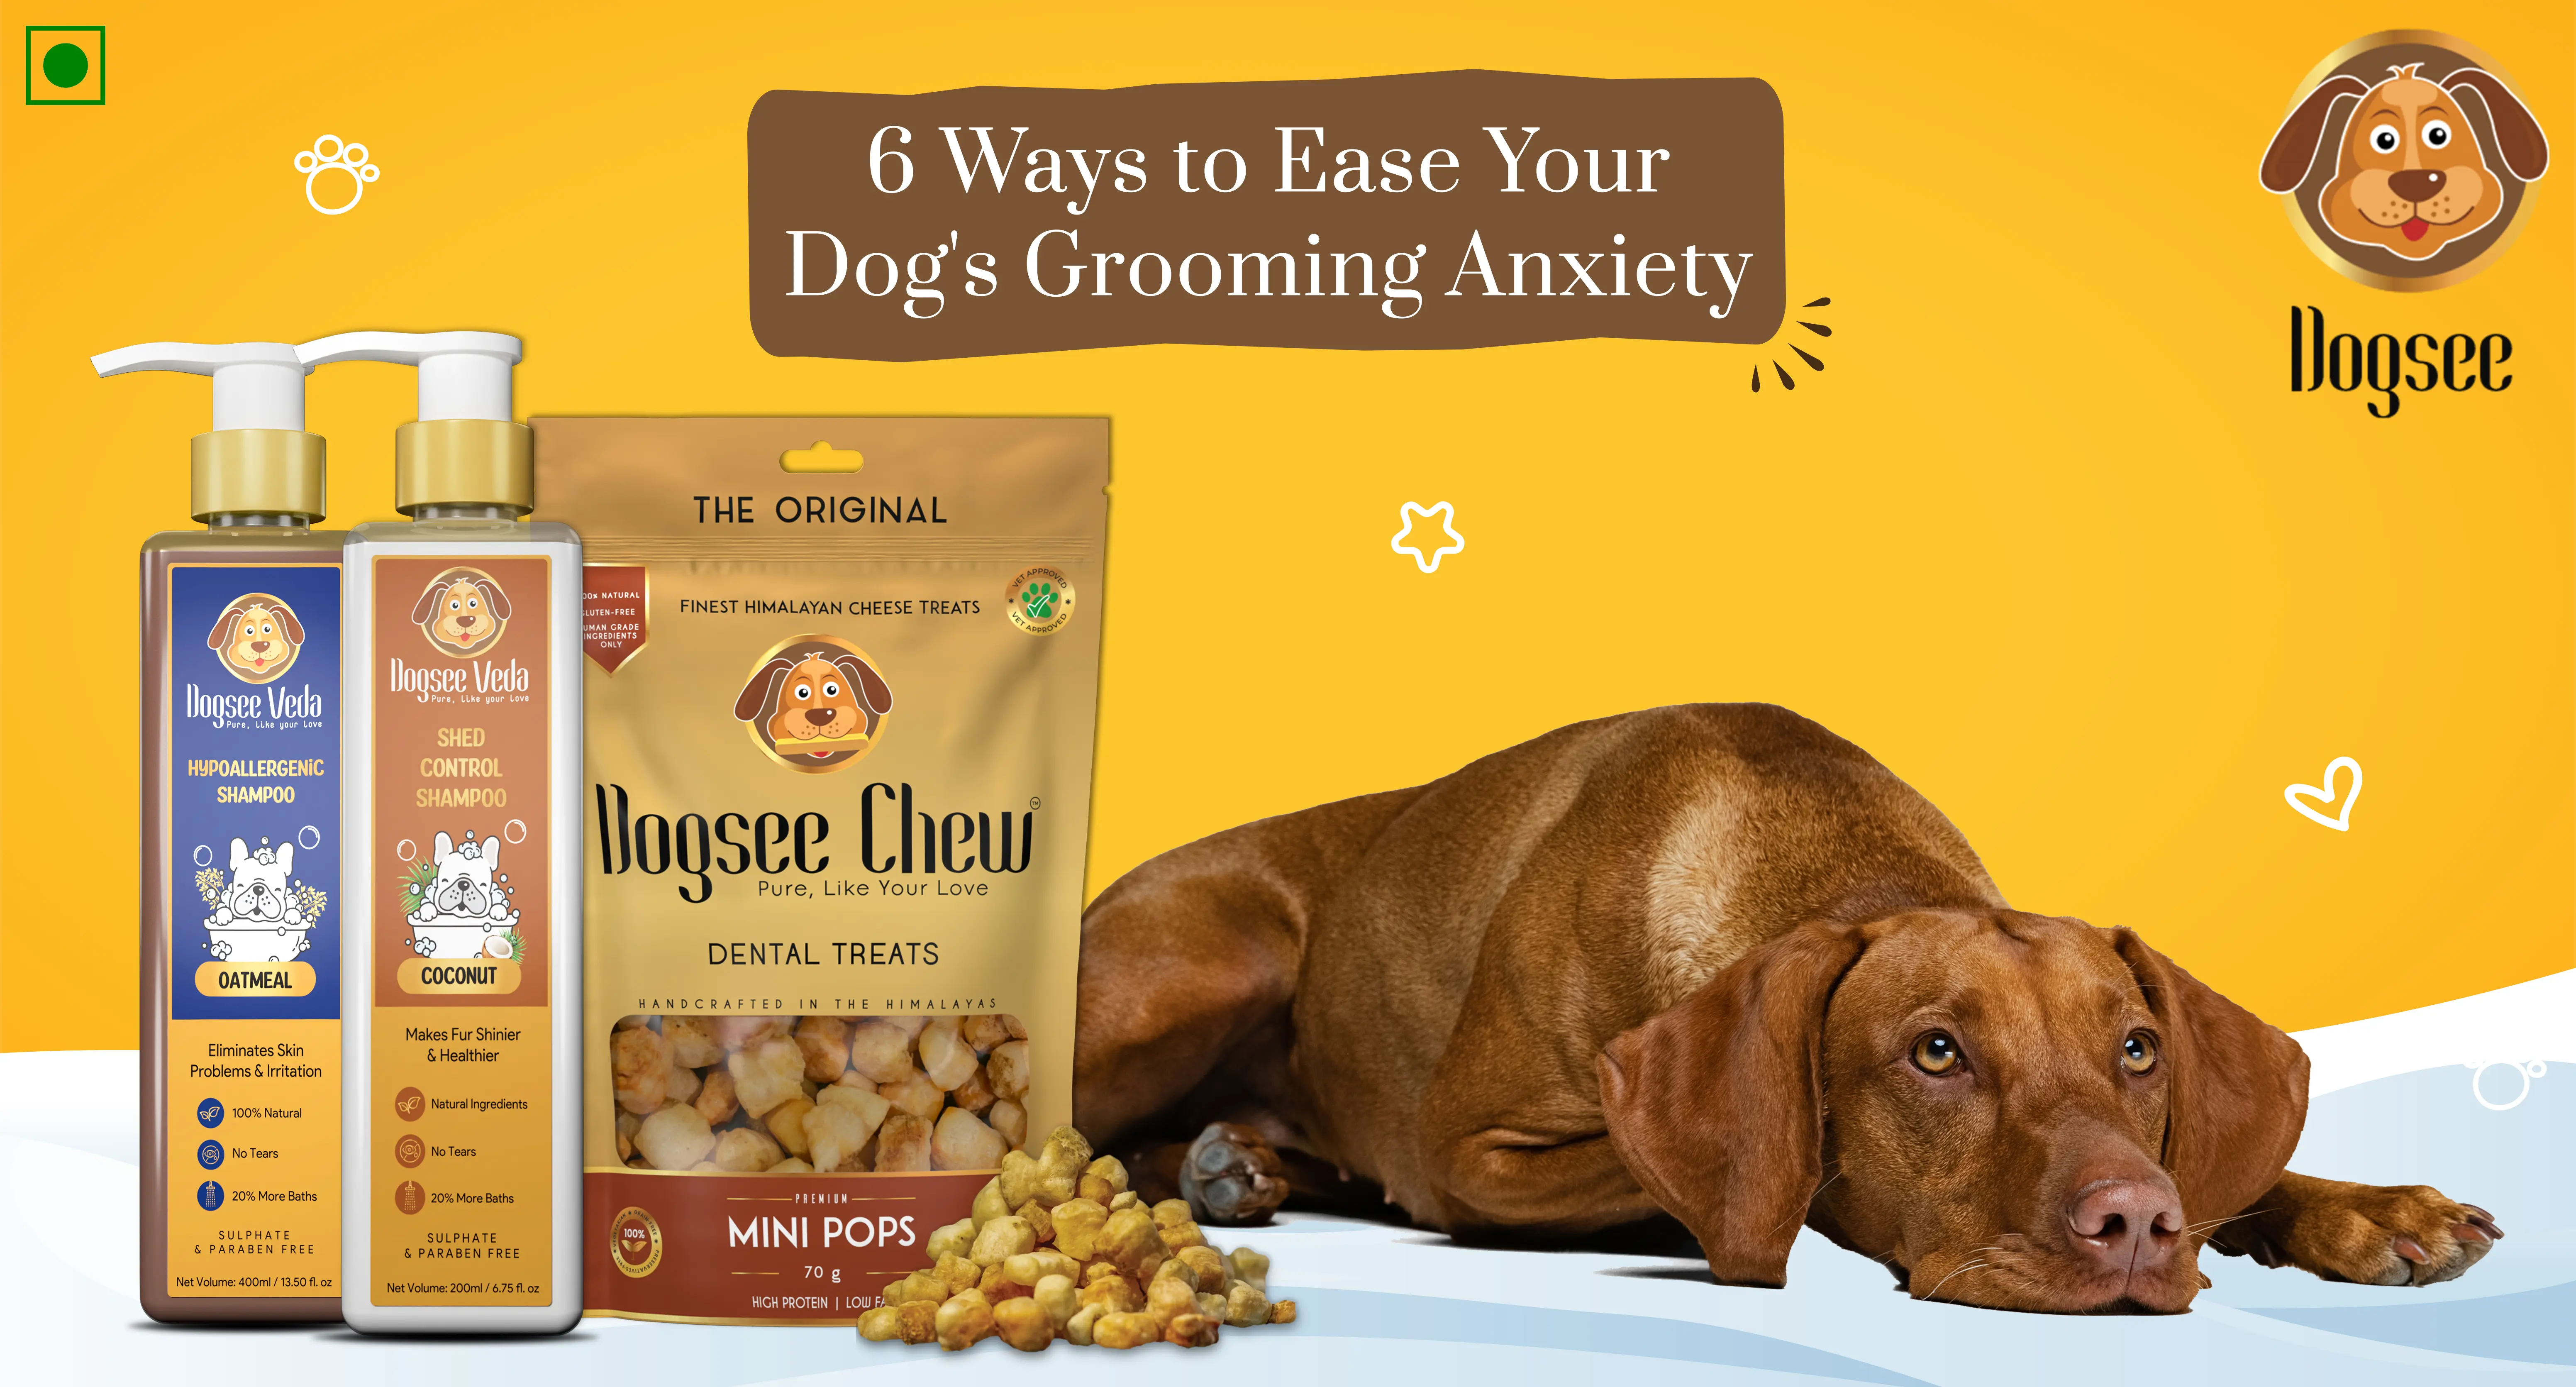 ﻿6 Ways to Ease Your Dog's Grooming Anxiety